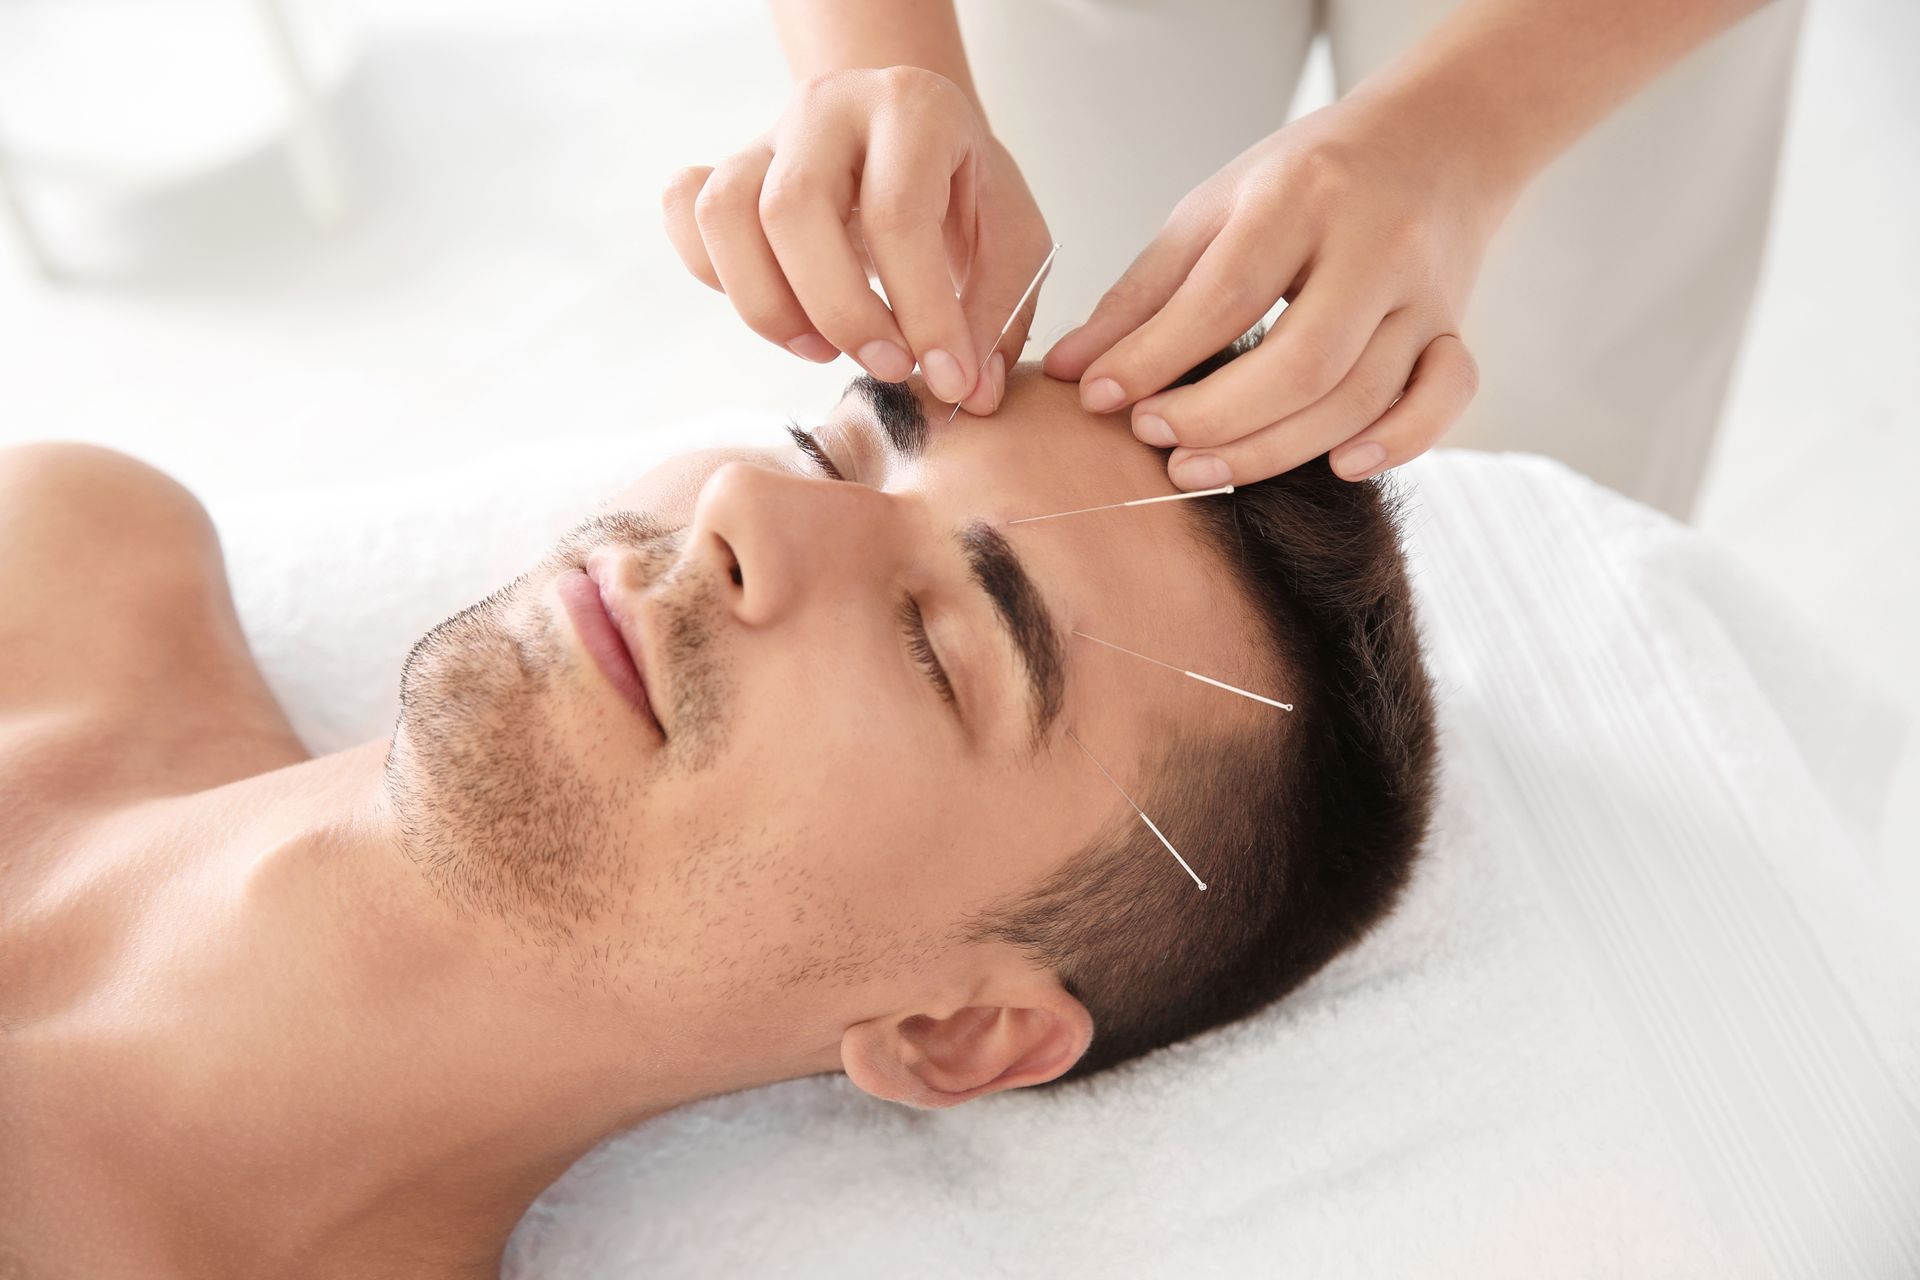 A man is getting acupuncture treatment on his forehead to promote better sperm quality